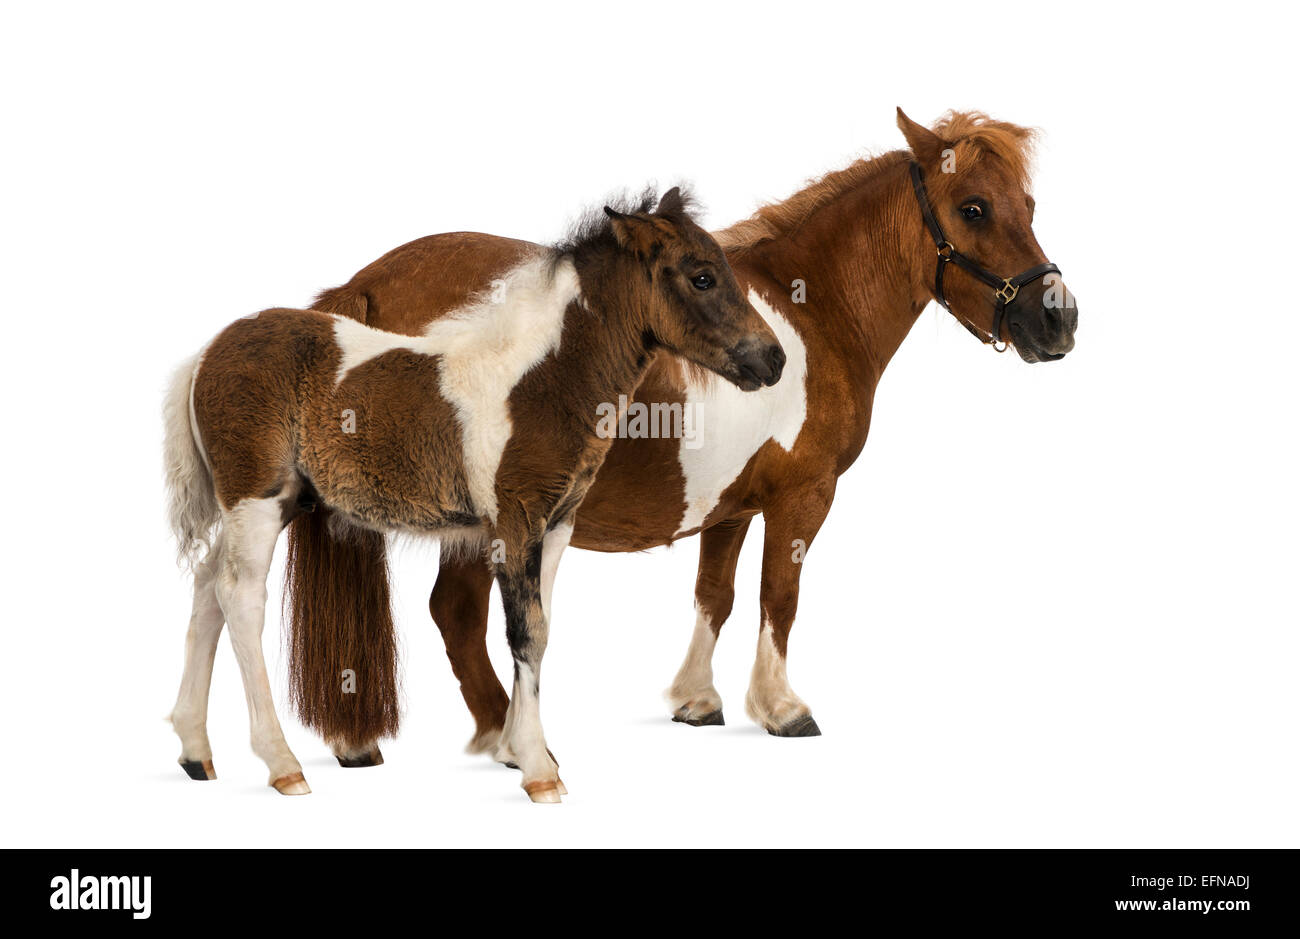 Shetland pony and foal, 9 years old and 1 month old, standing in front of white background Stock Photo